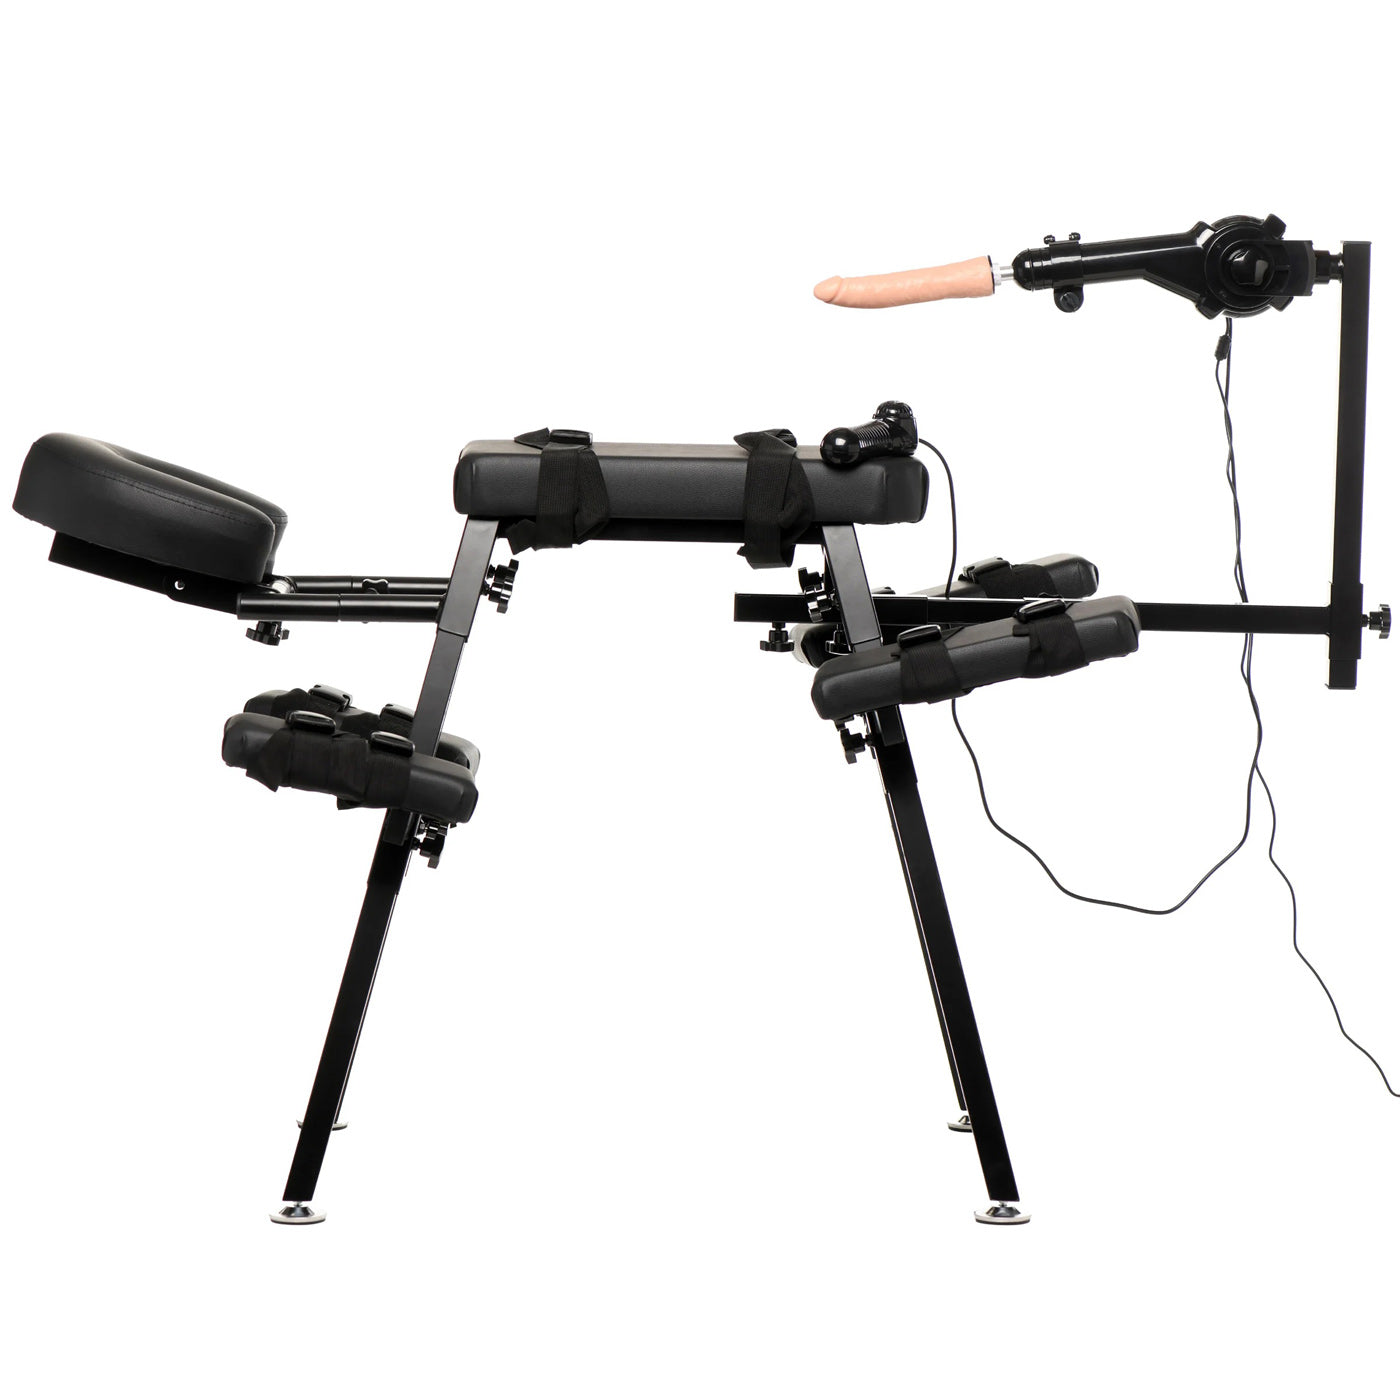 Obedience Bench With Sex Machine - Black MS-AH298